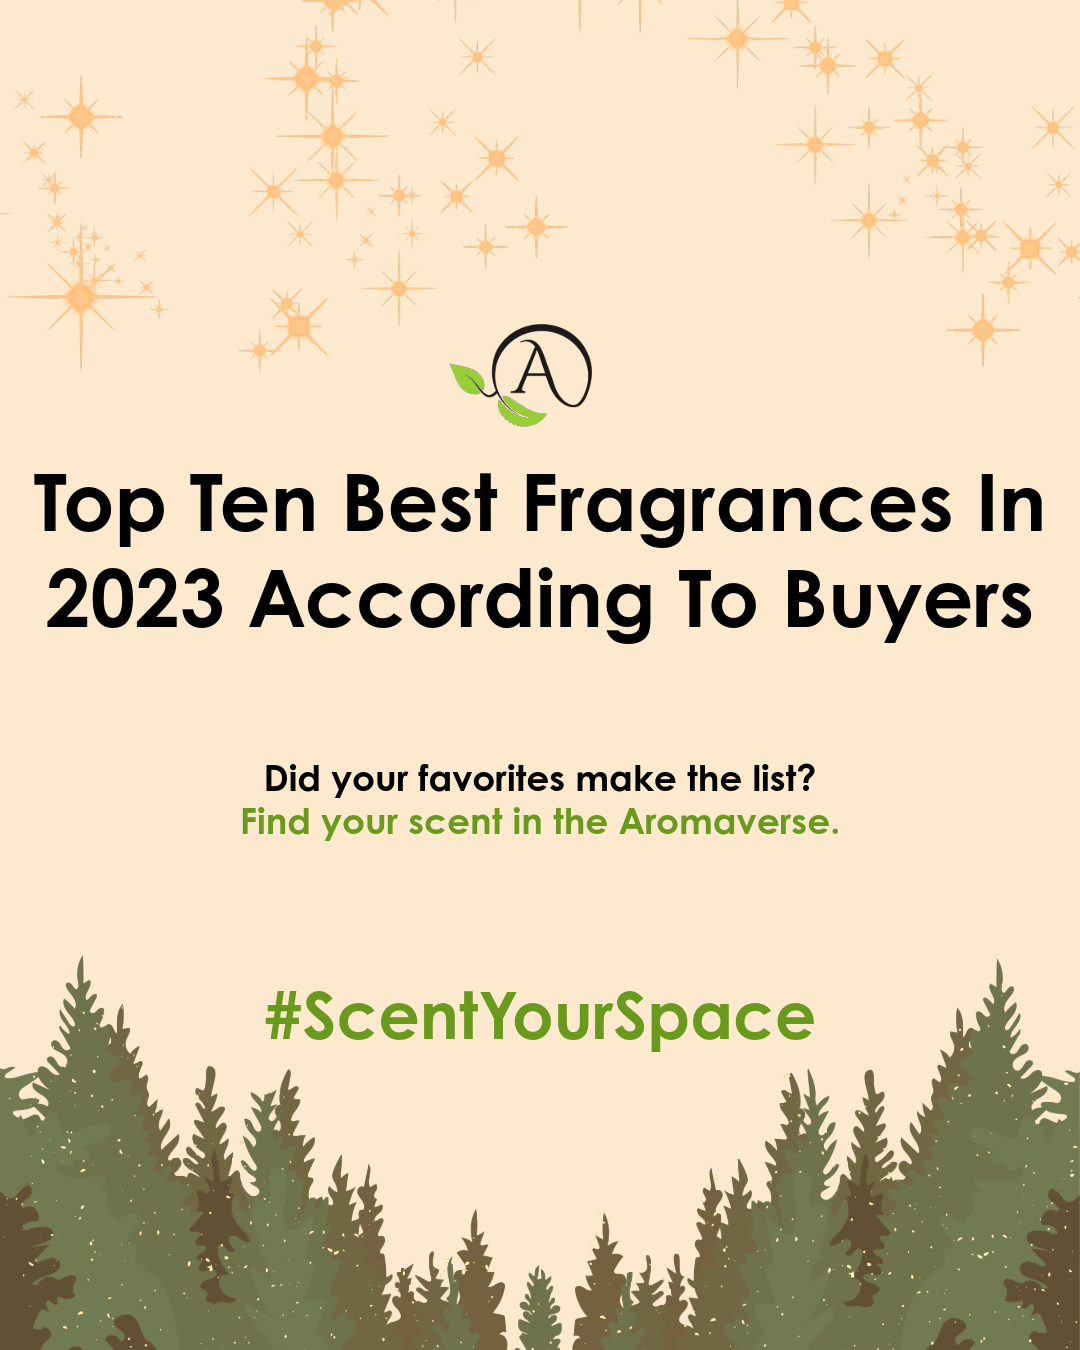 top ten best fragrances of in 2023 according to buyers aroma retail las vegas hotel resorts collection home decor fragrance oil diffuser scent machine